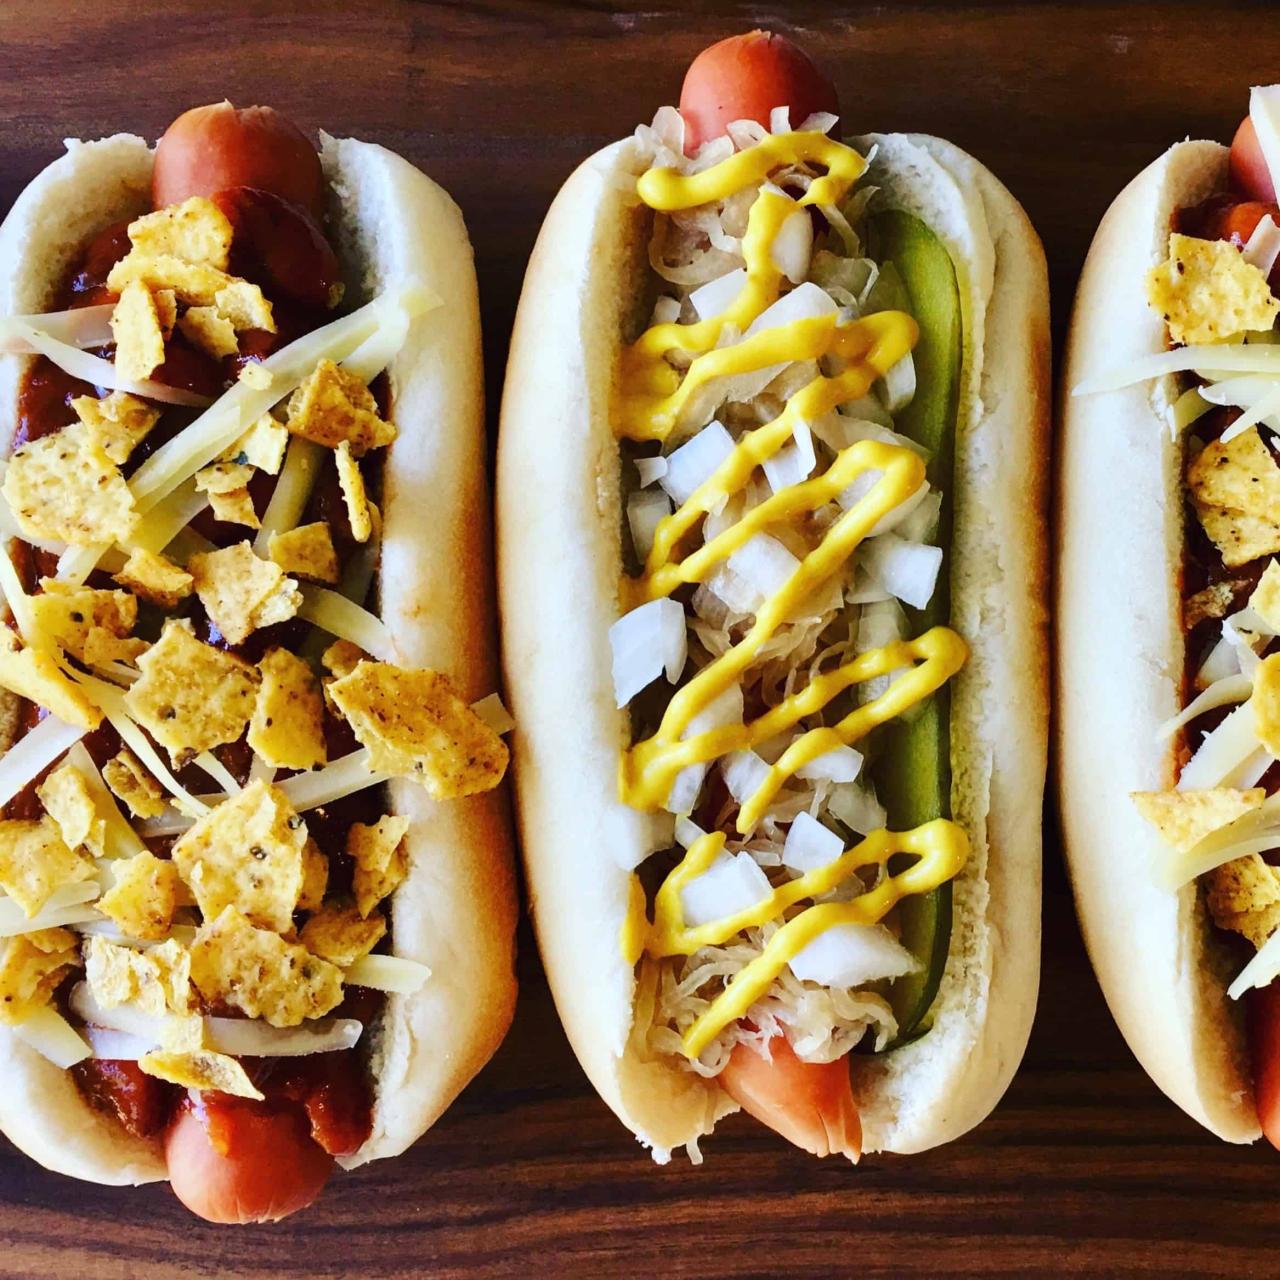 Hot Dog Toppings Ideas - Peter's Food Adventures